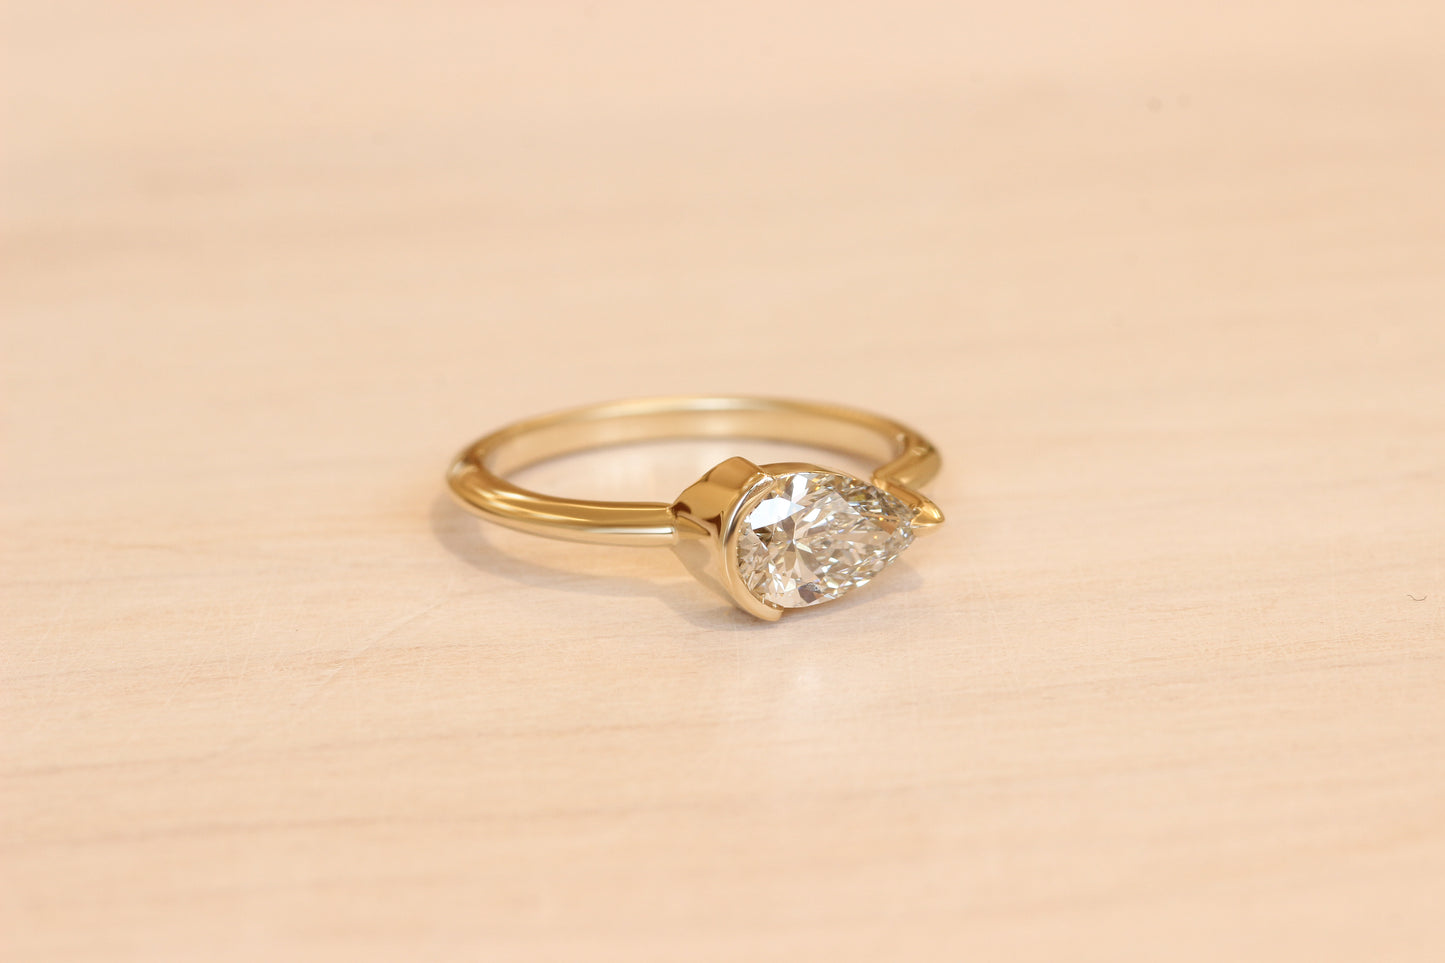 Pear white diamond horizontally set in clients recycled yellow gold